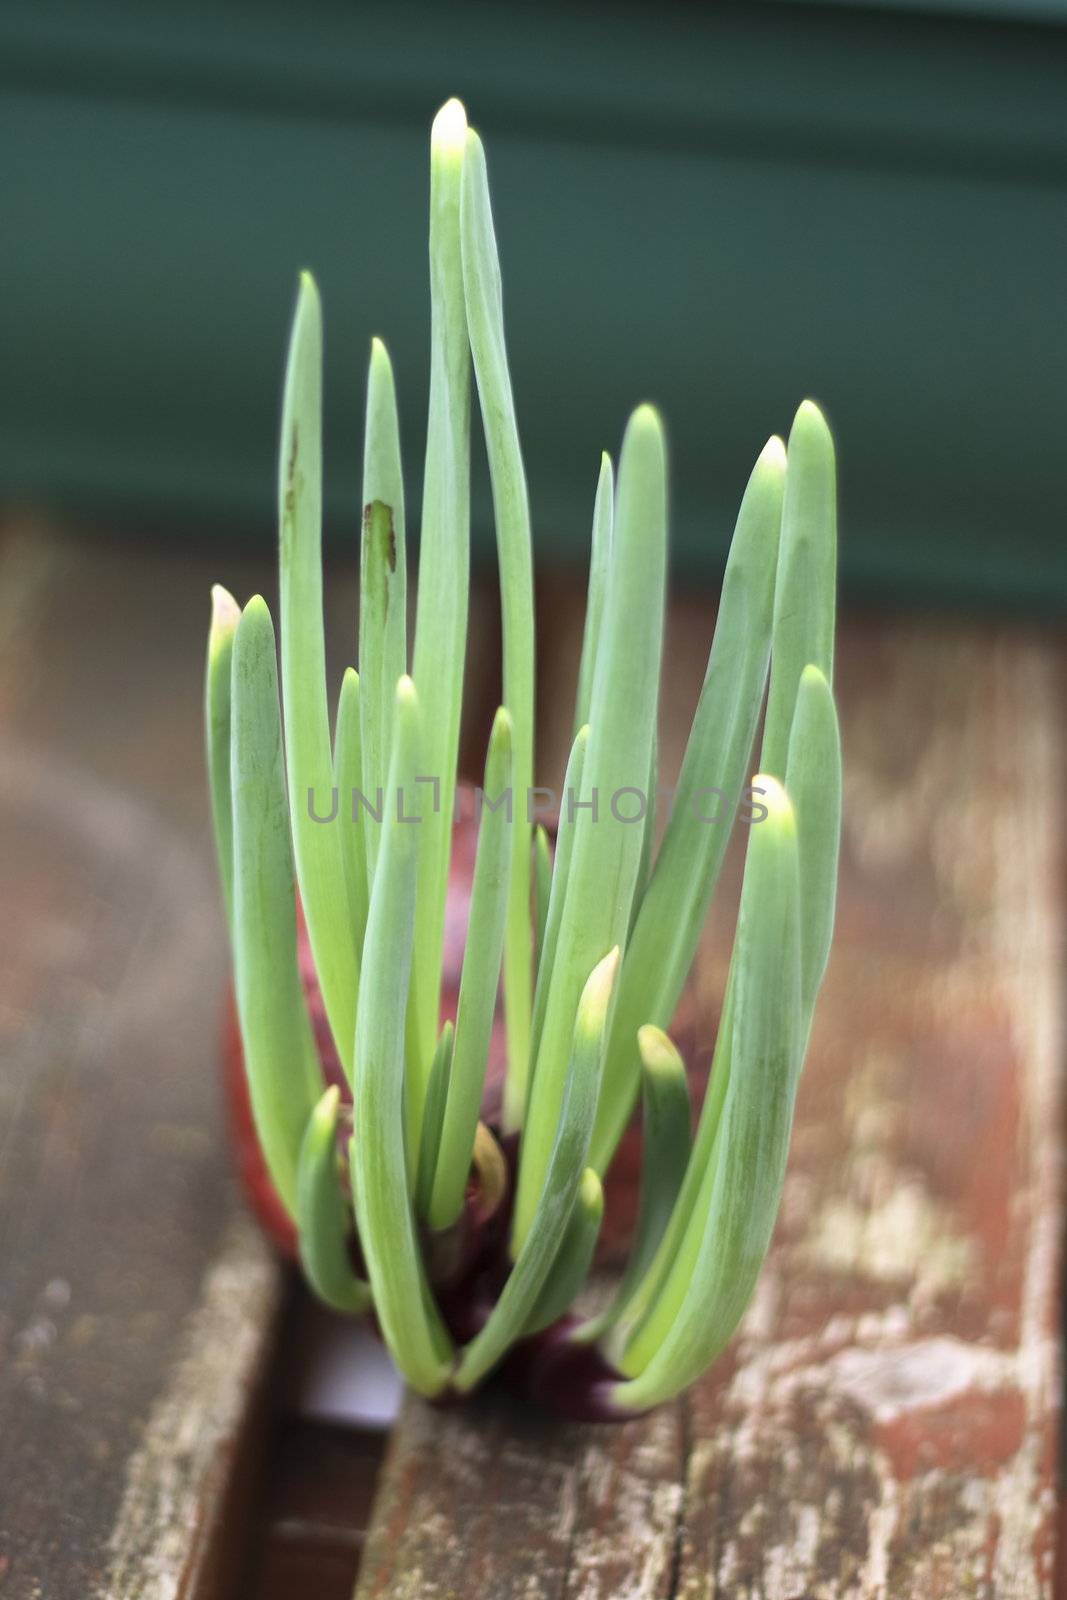 onion showing new shoots by leafy